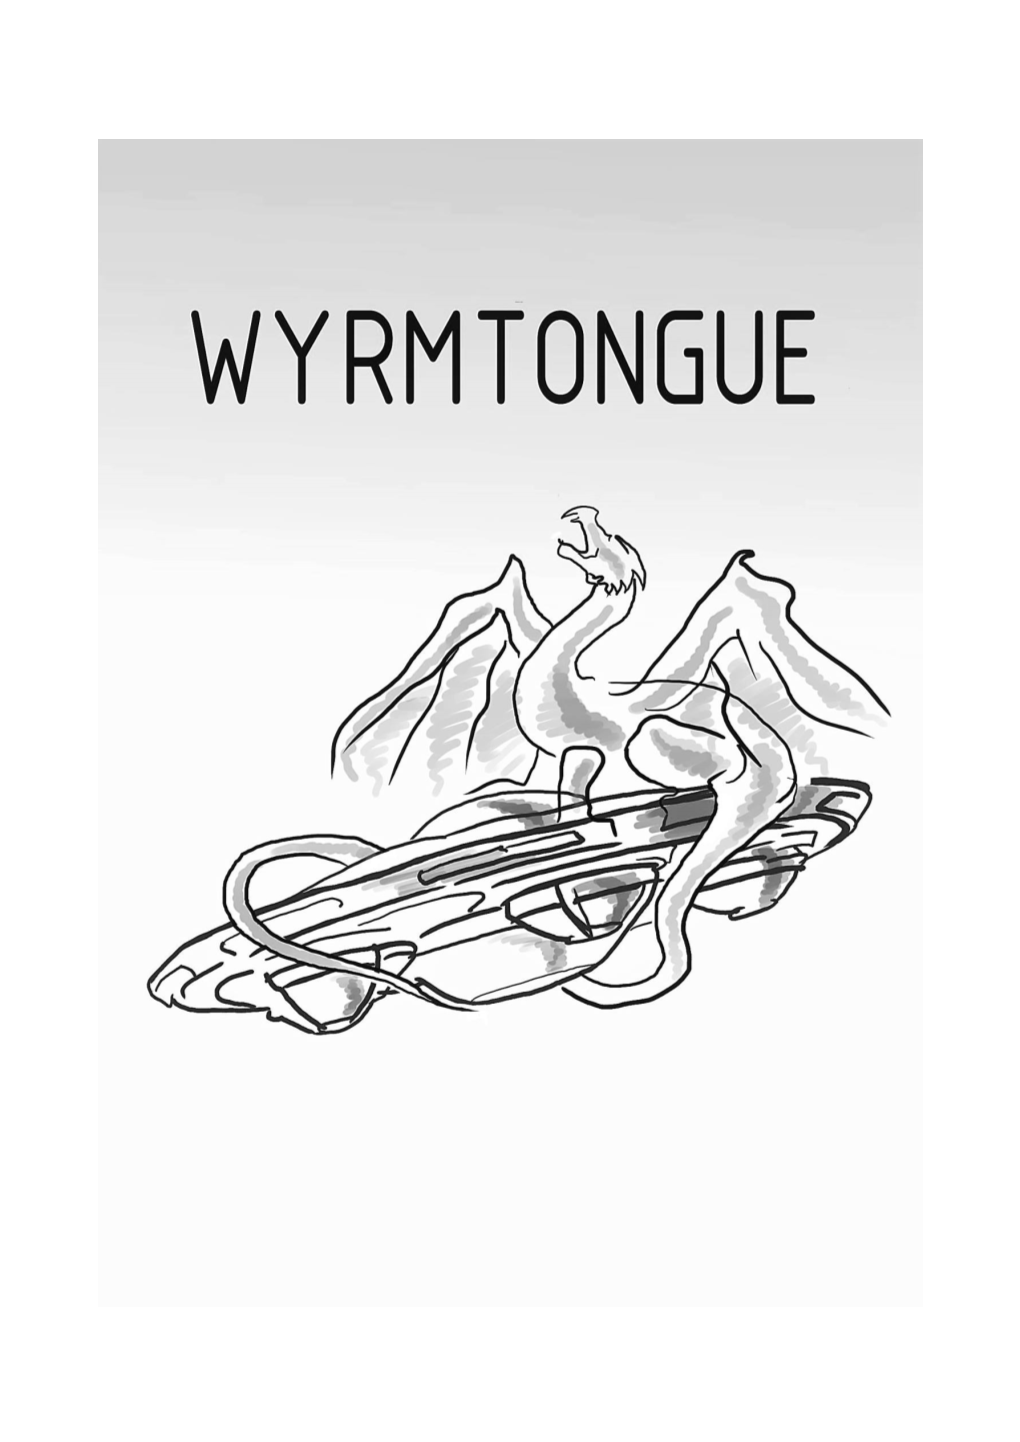 Wyrmtongue, the Newsletter for the Imperial College Science Fiction and Fantasy Society (ICSF)